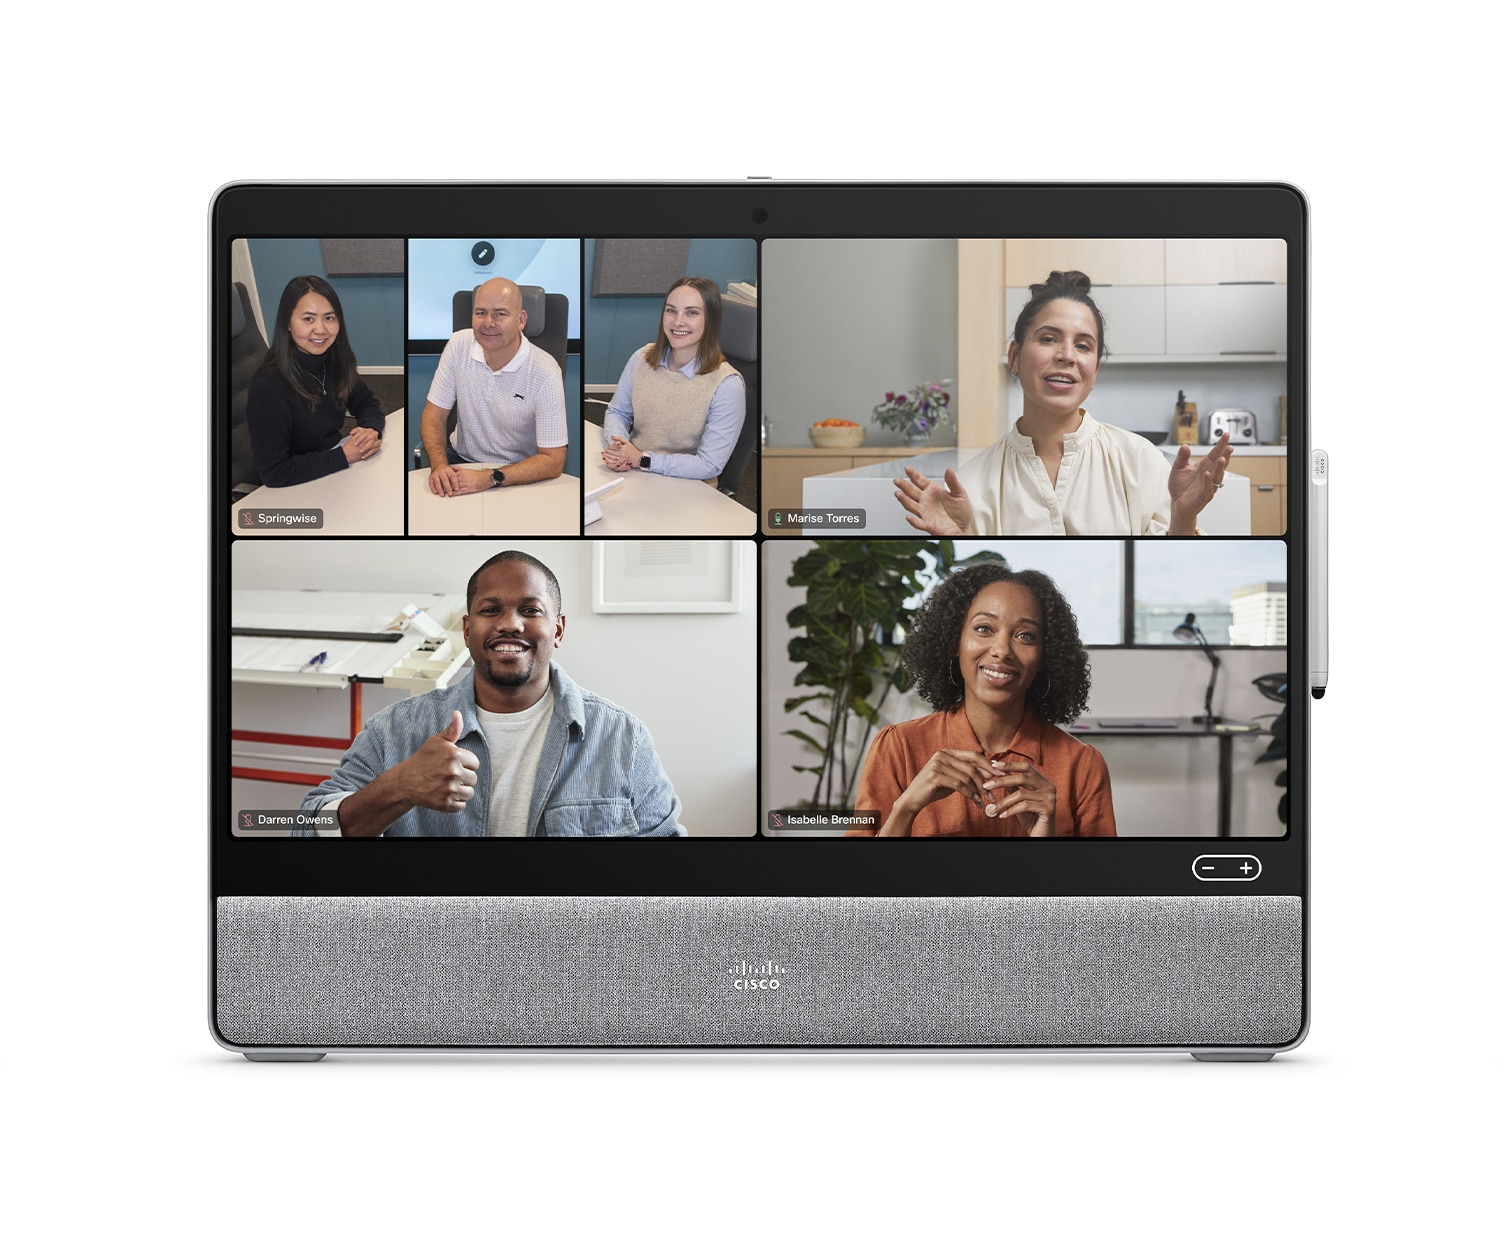 Frames view on Cisco Desk device with third-party meeting platform selected for video conference.